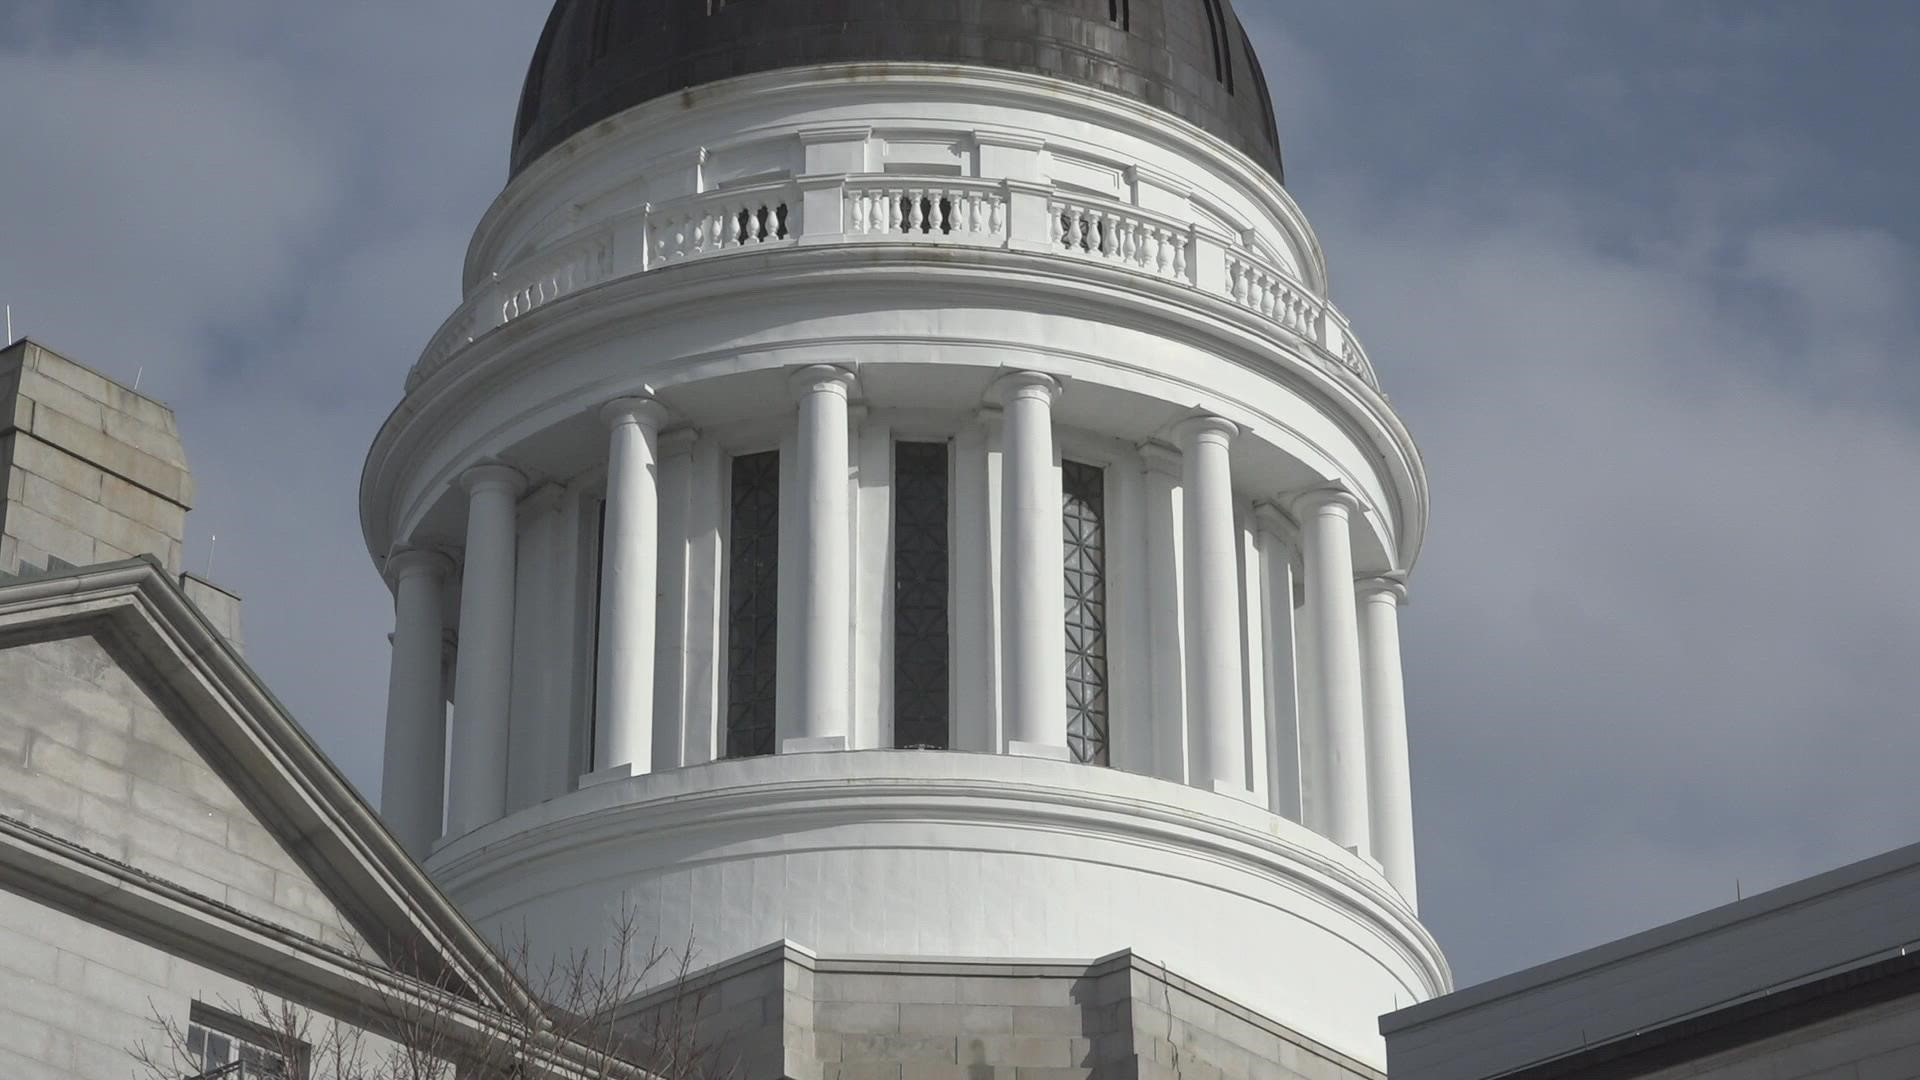 State leaders said the Maine Retirement Savings Program should be implemented come spring of 2024 to help all Mainers save for retirement.